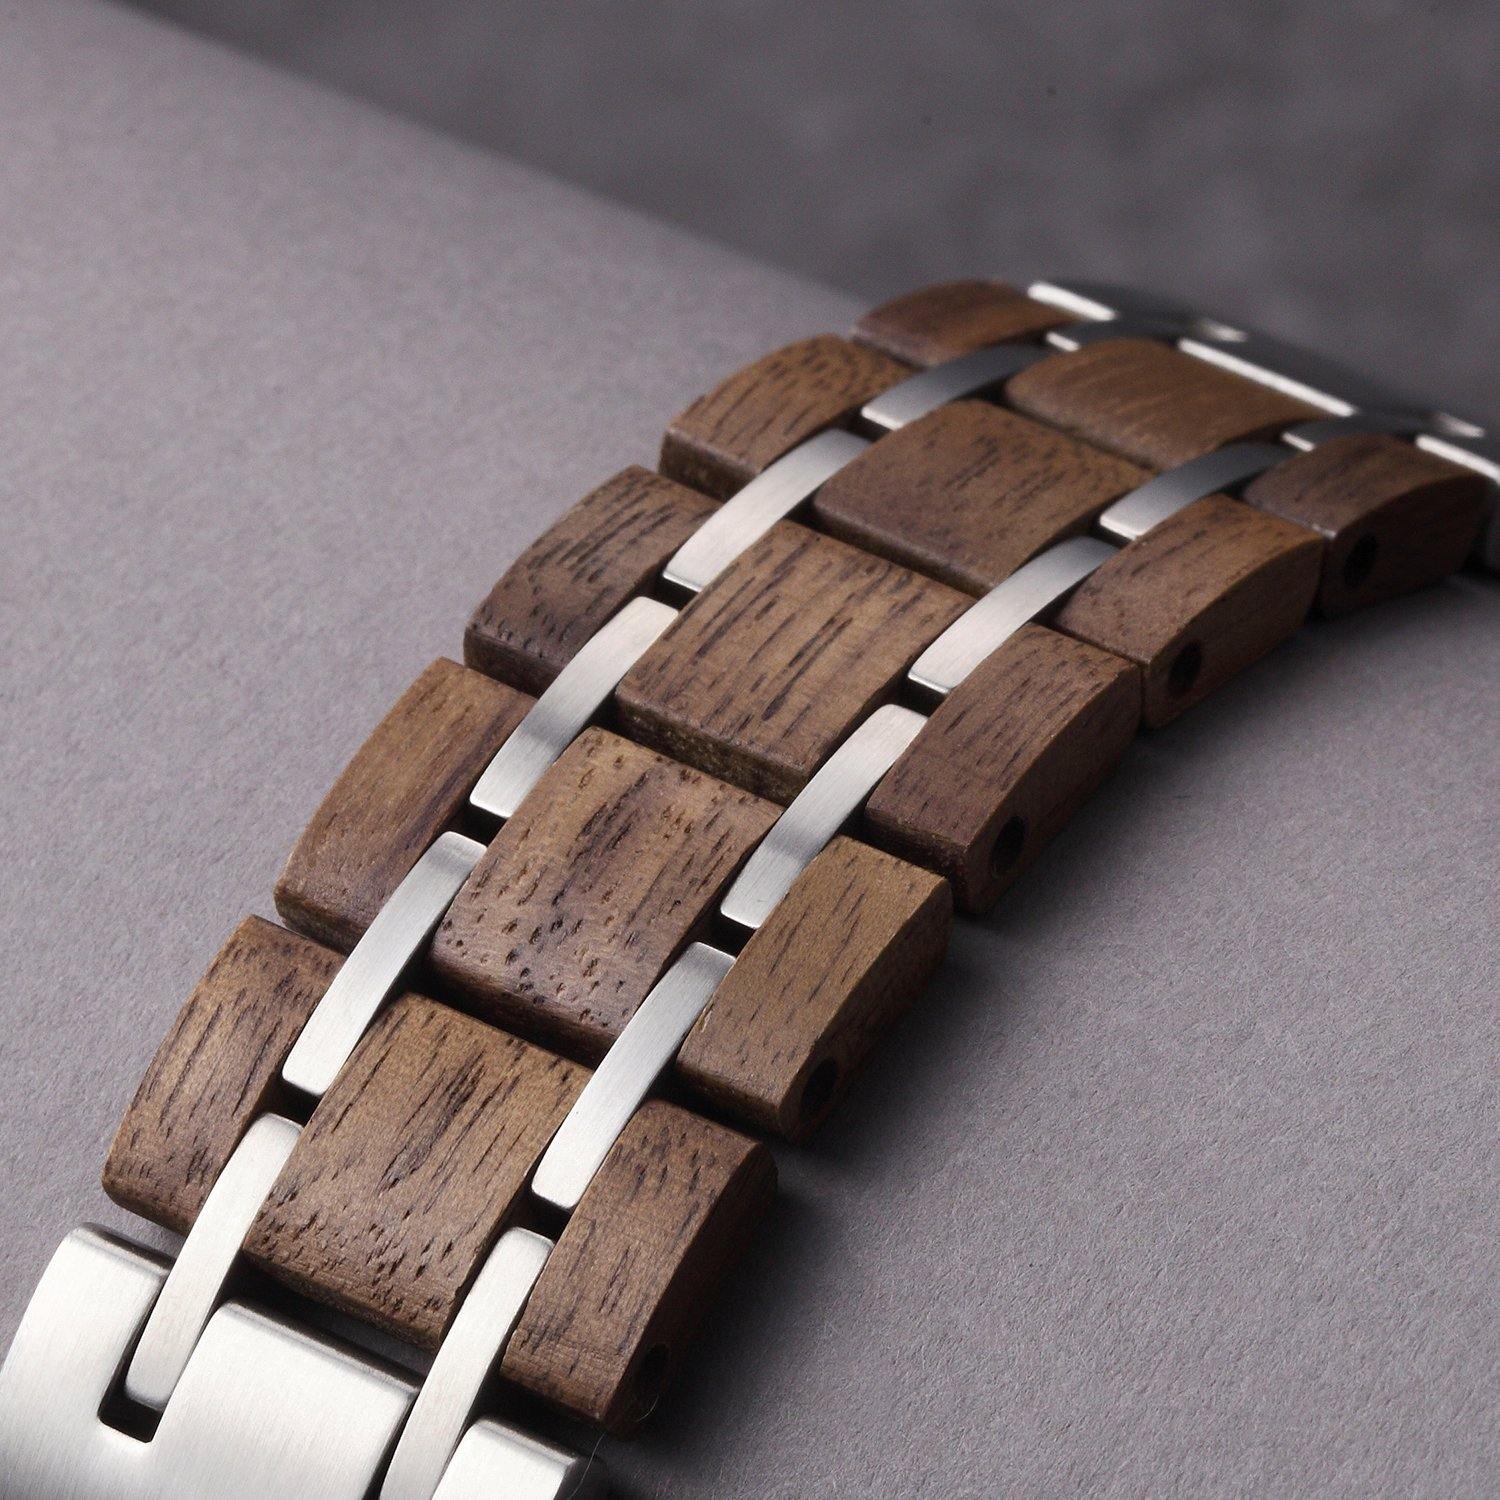 Walnut Silver Apple Watch Band 🌳 Natural Wood. ♻️ Eco-friendly. ✈️ Free Worldwide Shipping. 🎁 Perfect Gift.